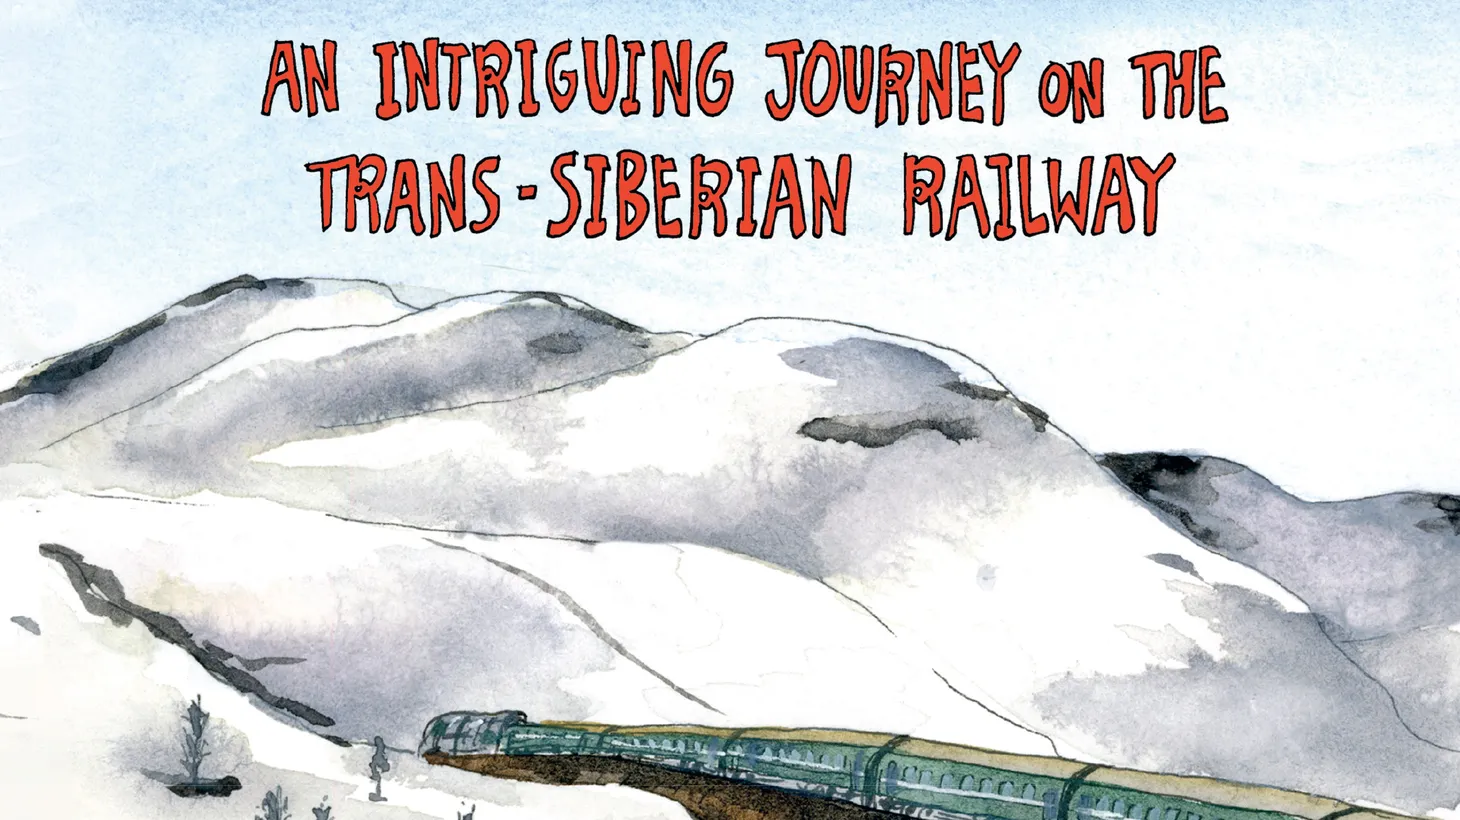 With the distinction of being the longest railroad in the world, the Trans-Siberian Railway actually has three routes.